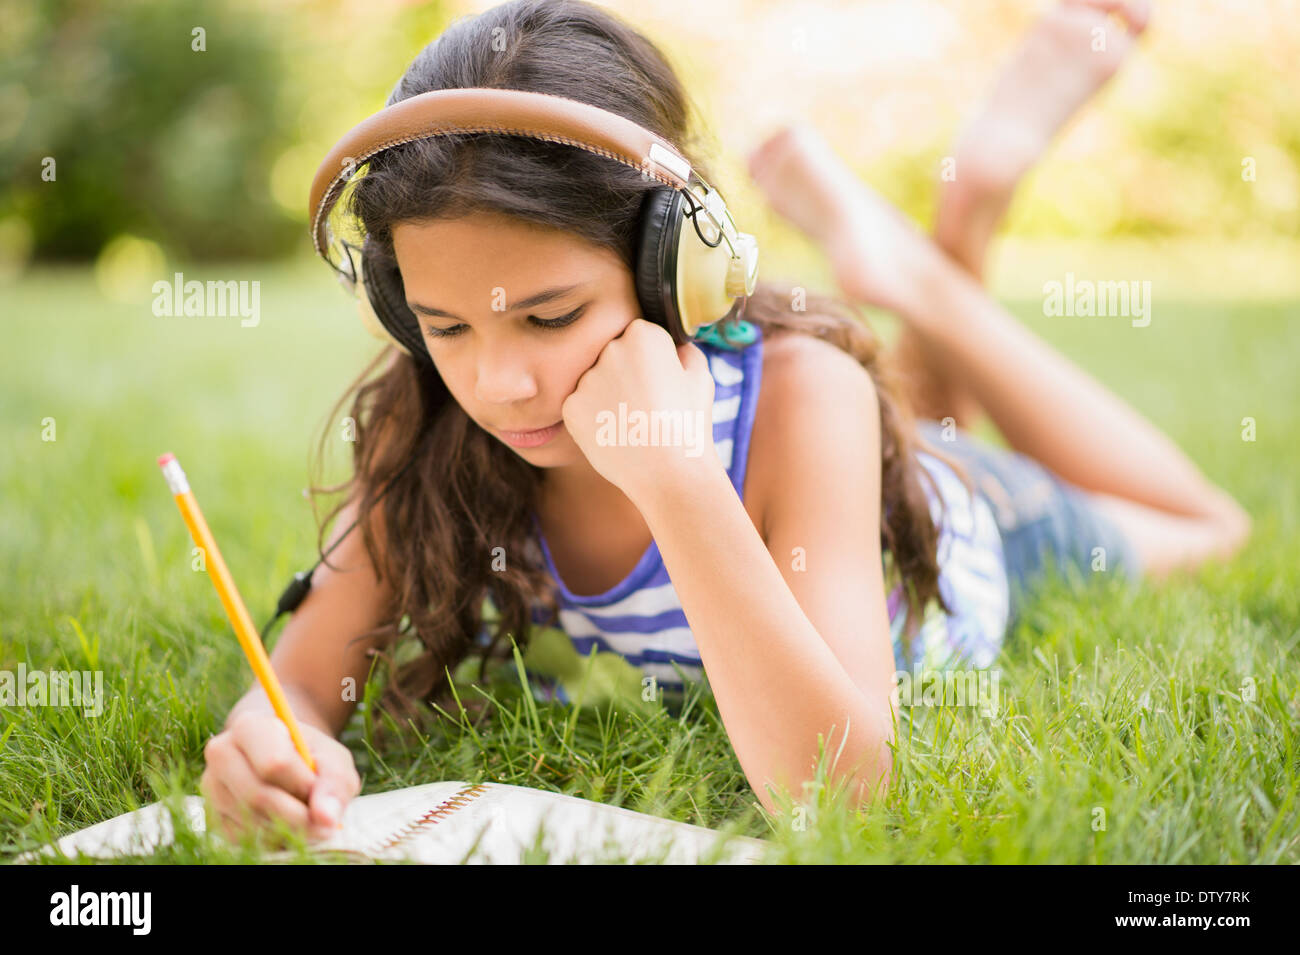 Mixed race girl listening to headphones and drawing in grass Stock Photo